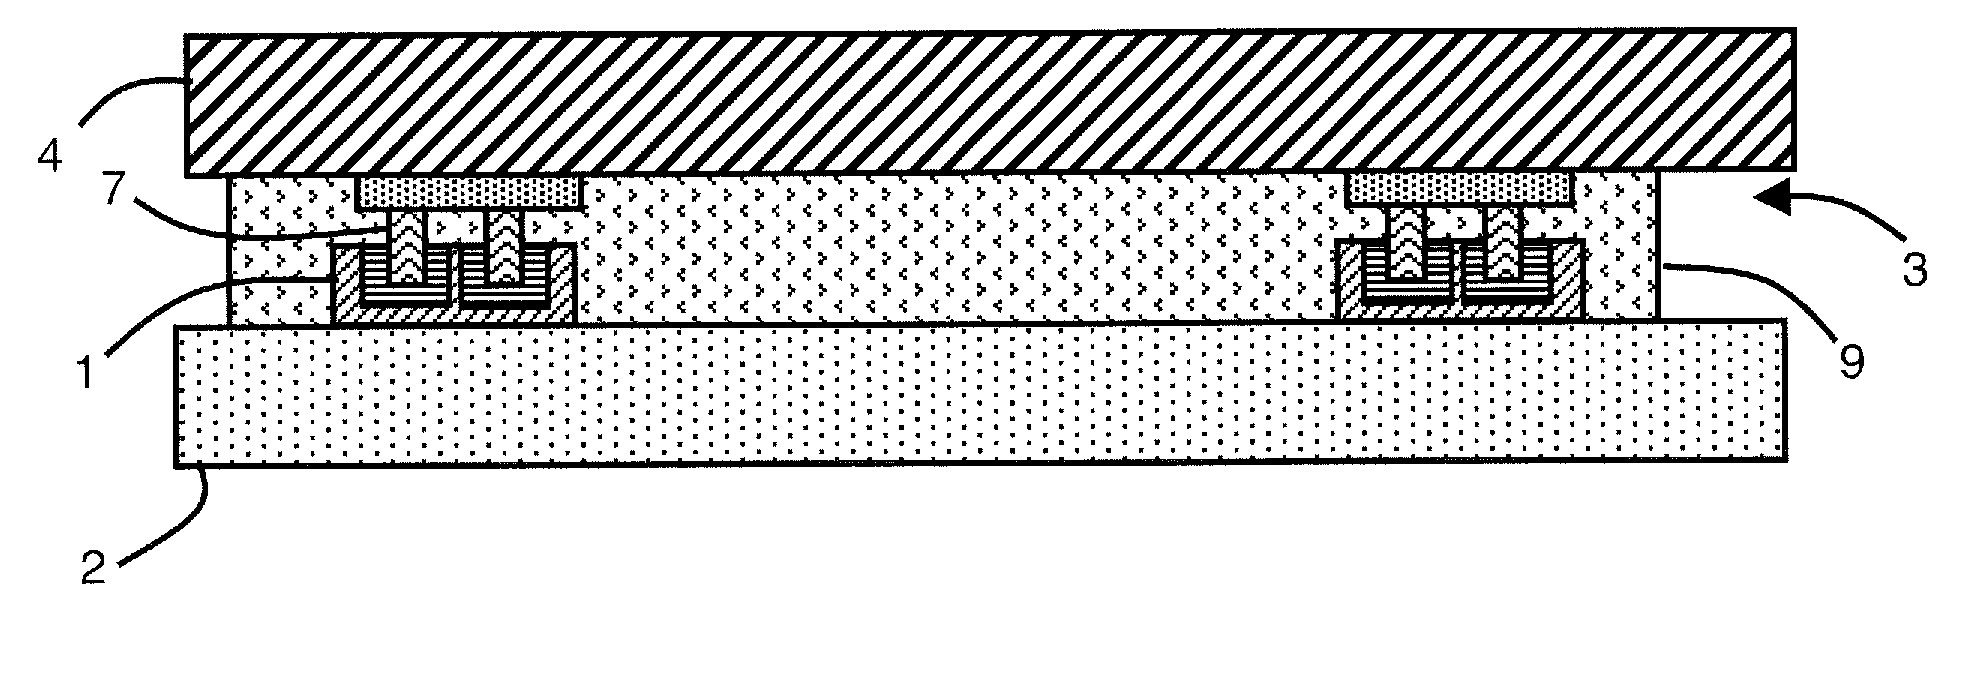 Method for fabricating two substrates connected by at least one mechanical and electrically conductive connection and structure obtained